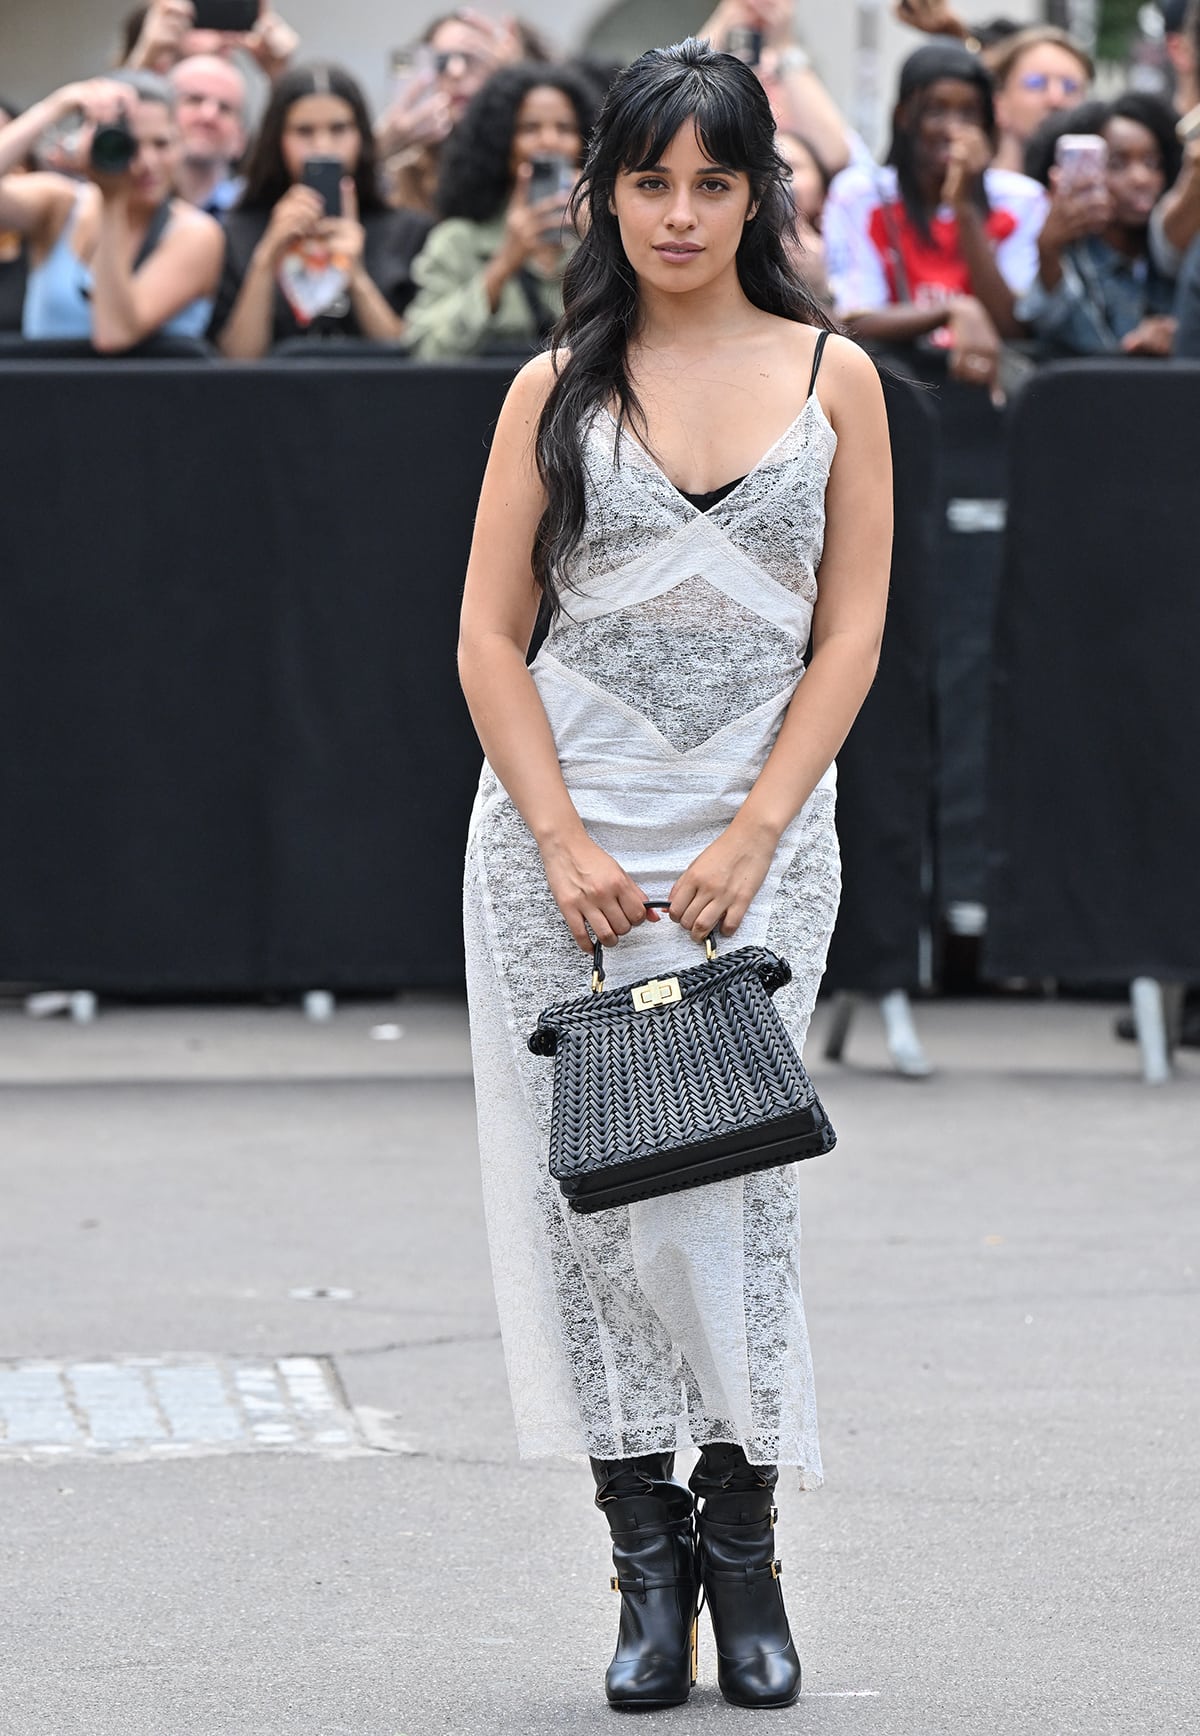 Camila Cabello contrasts her lovely white sheer lace Fendi dress with edgy black leather knee-high boots at the Fendi Couture Fall 2024 presentation during Haute Couture Fashion Week in Paris on July 6, 2023